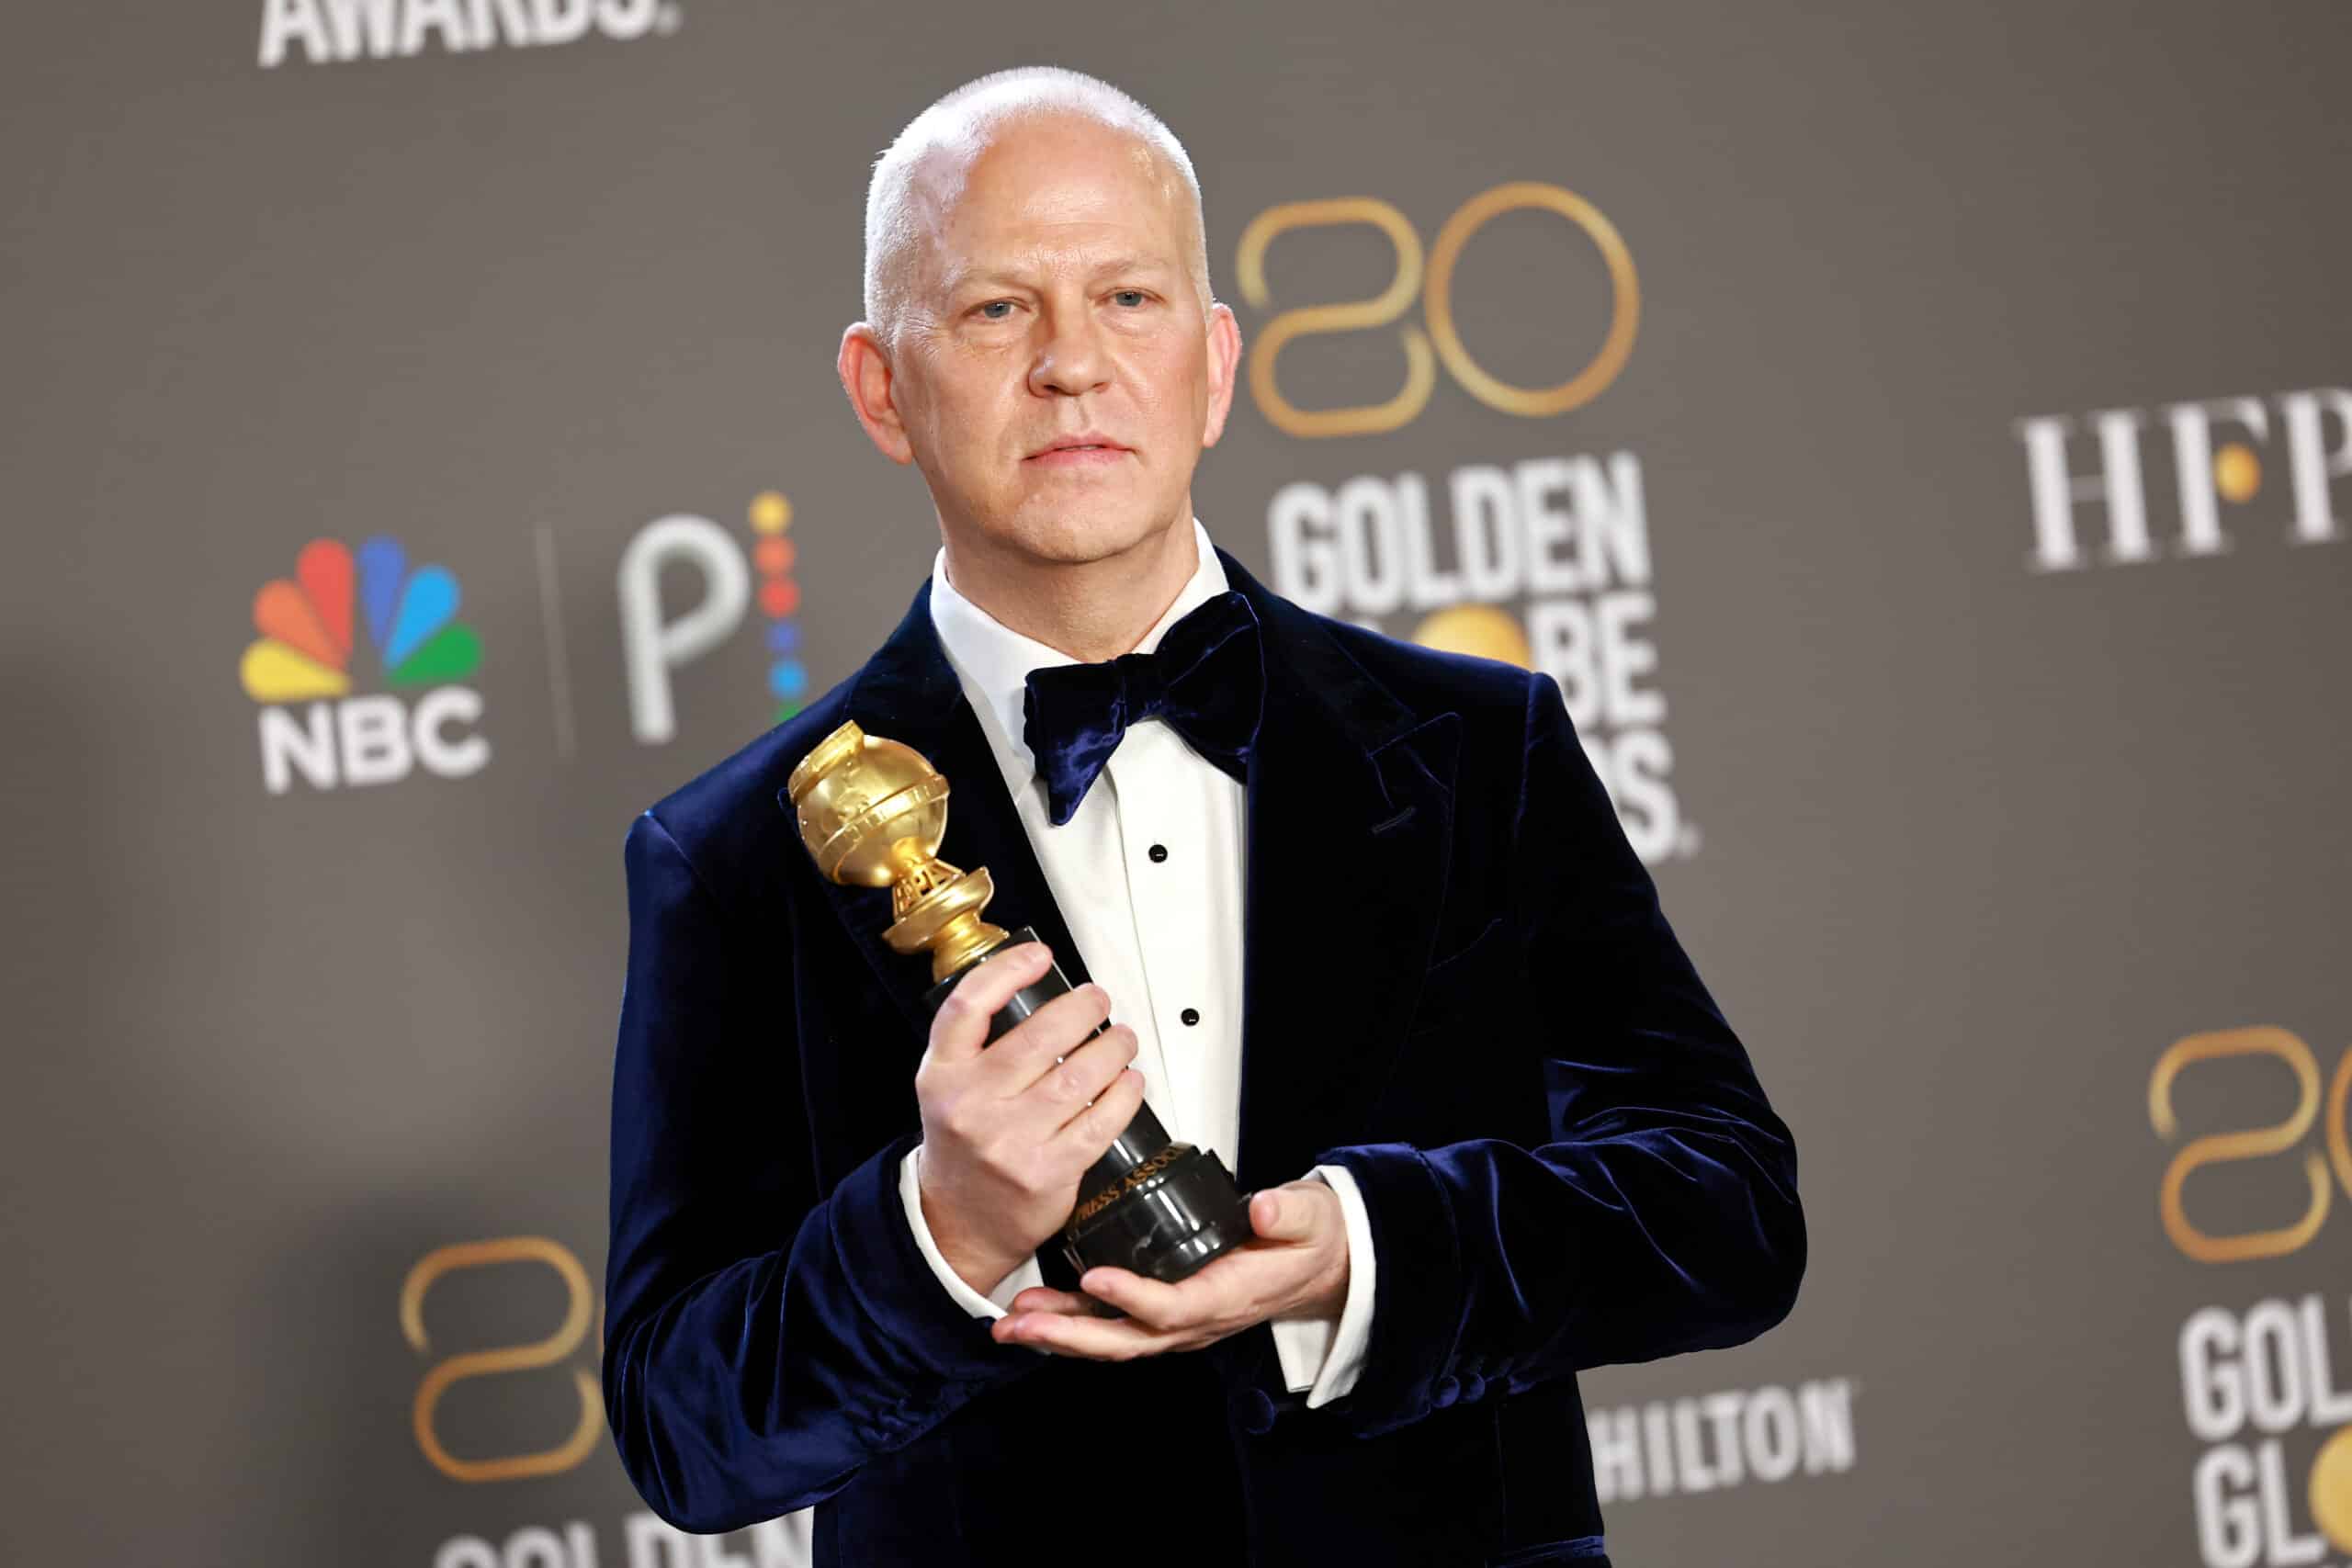 BEVERLY HILLS, CALIFORNIA - JANUARY 10: Ryan Murphy poses with the Carol Burnett Award in the press room during the 80th Annual Golden Globe Awards at The Beverly Hilton on January 10, 2023 in Beverly Hills, California.